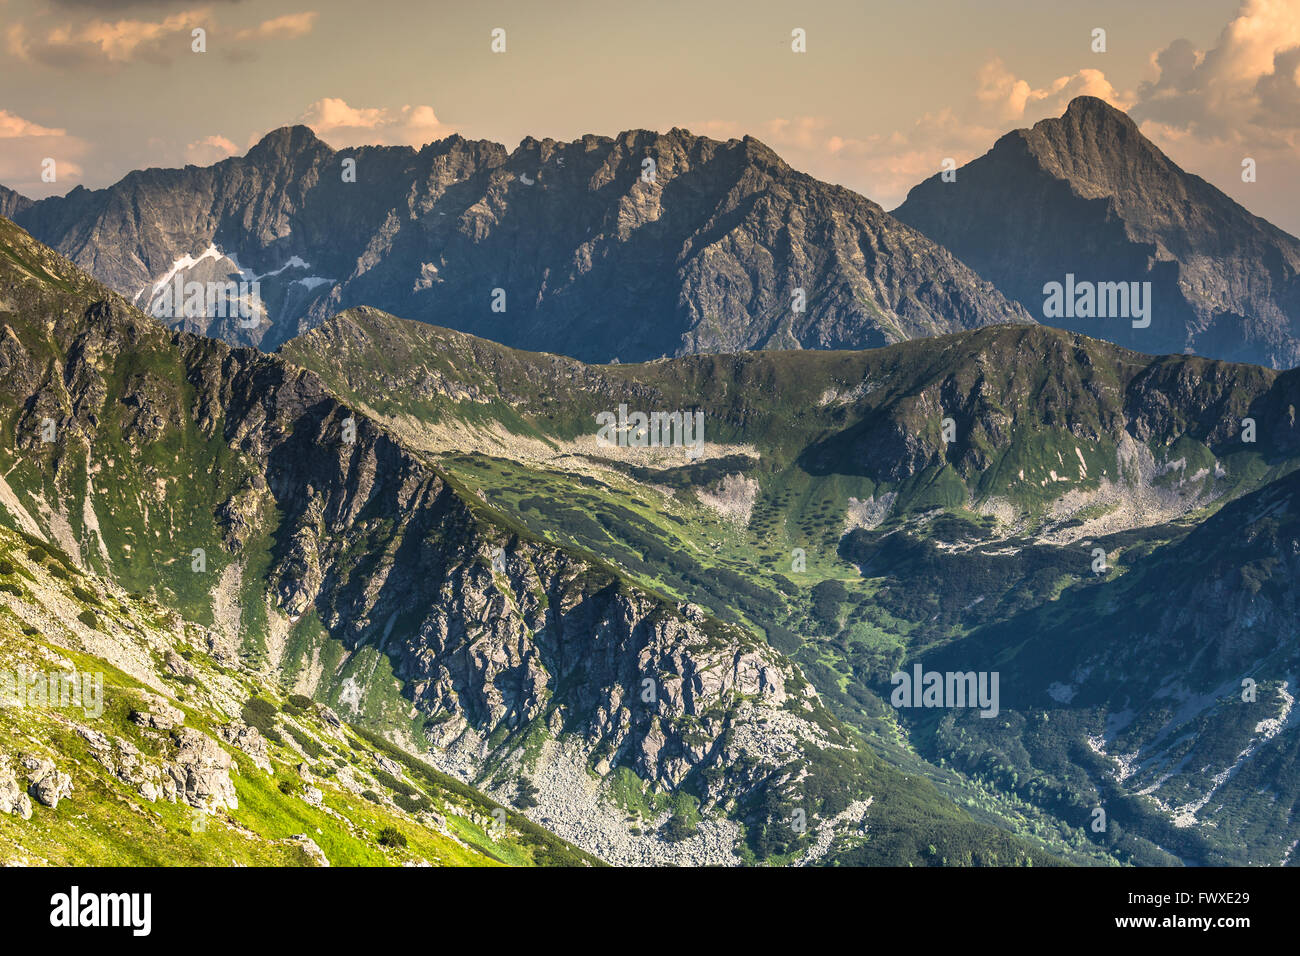 View from Kasprowy Wierch Summit in the Polish Tatra Mountains Stock Photo